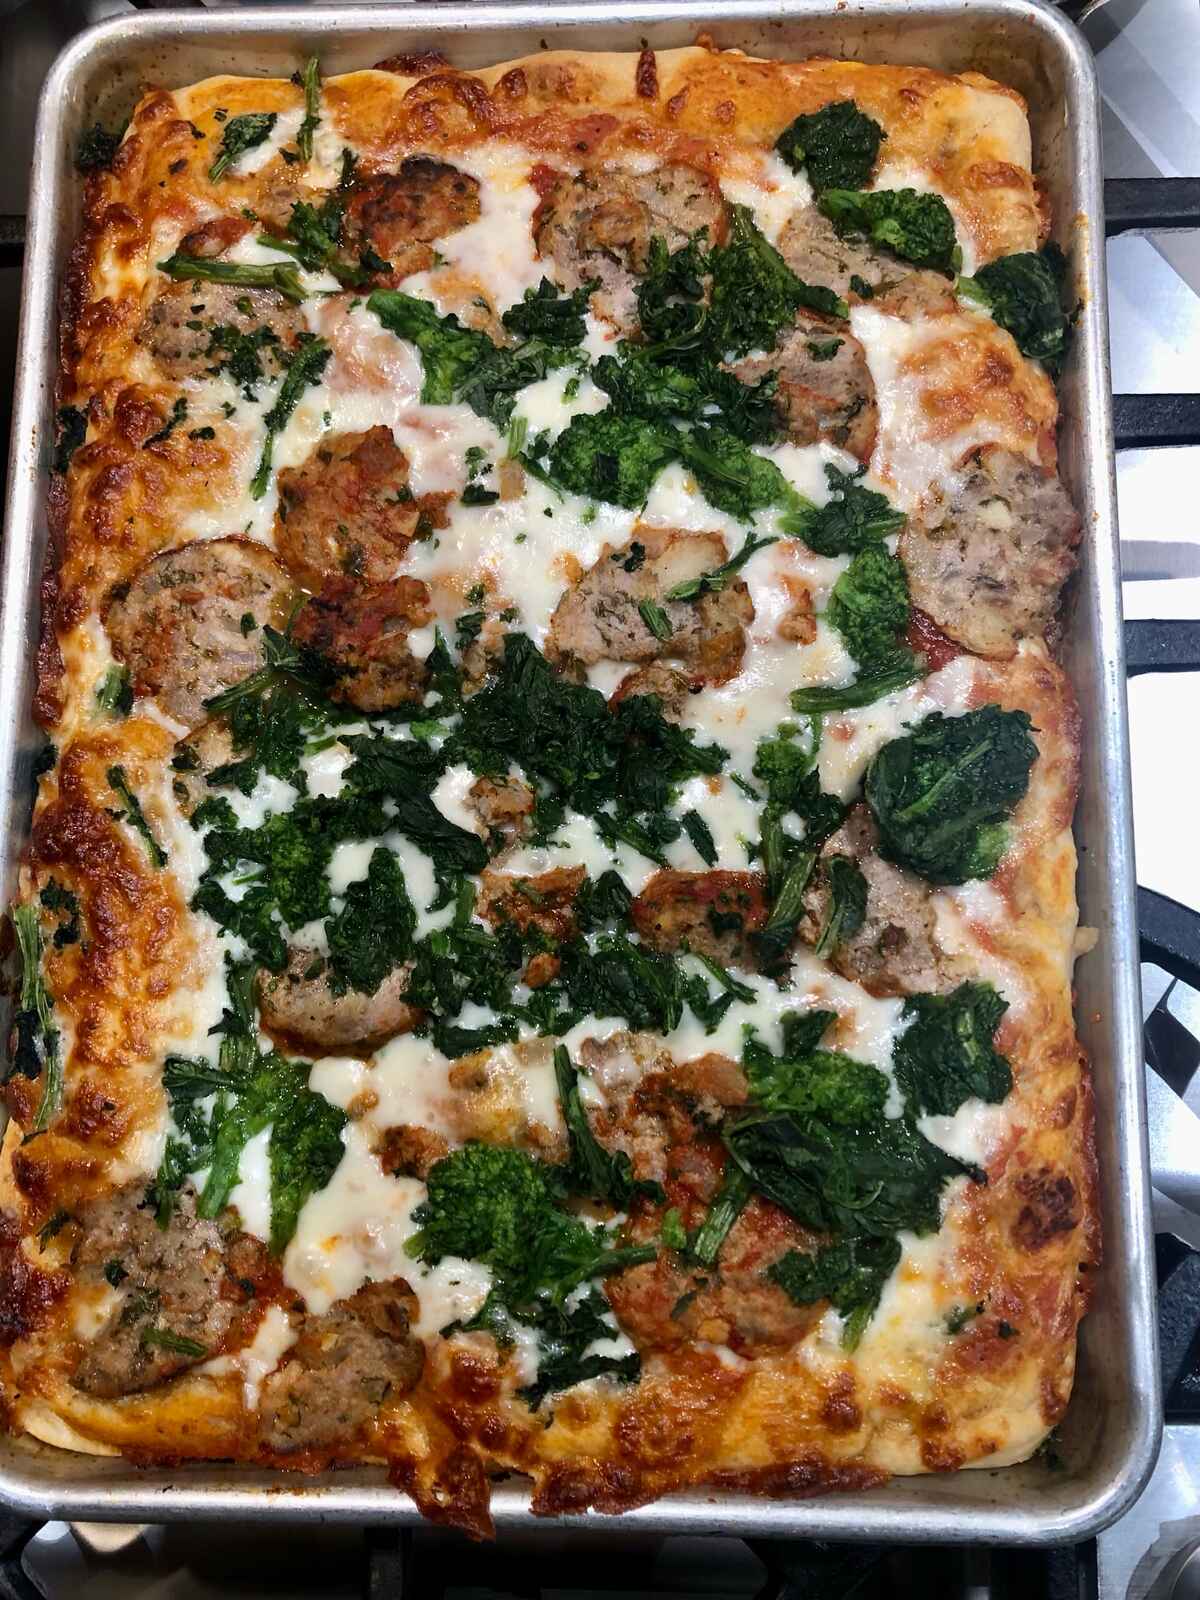 A meatball and broccoli rabe pizza